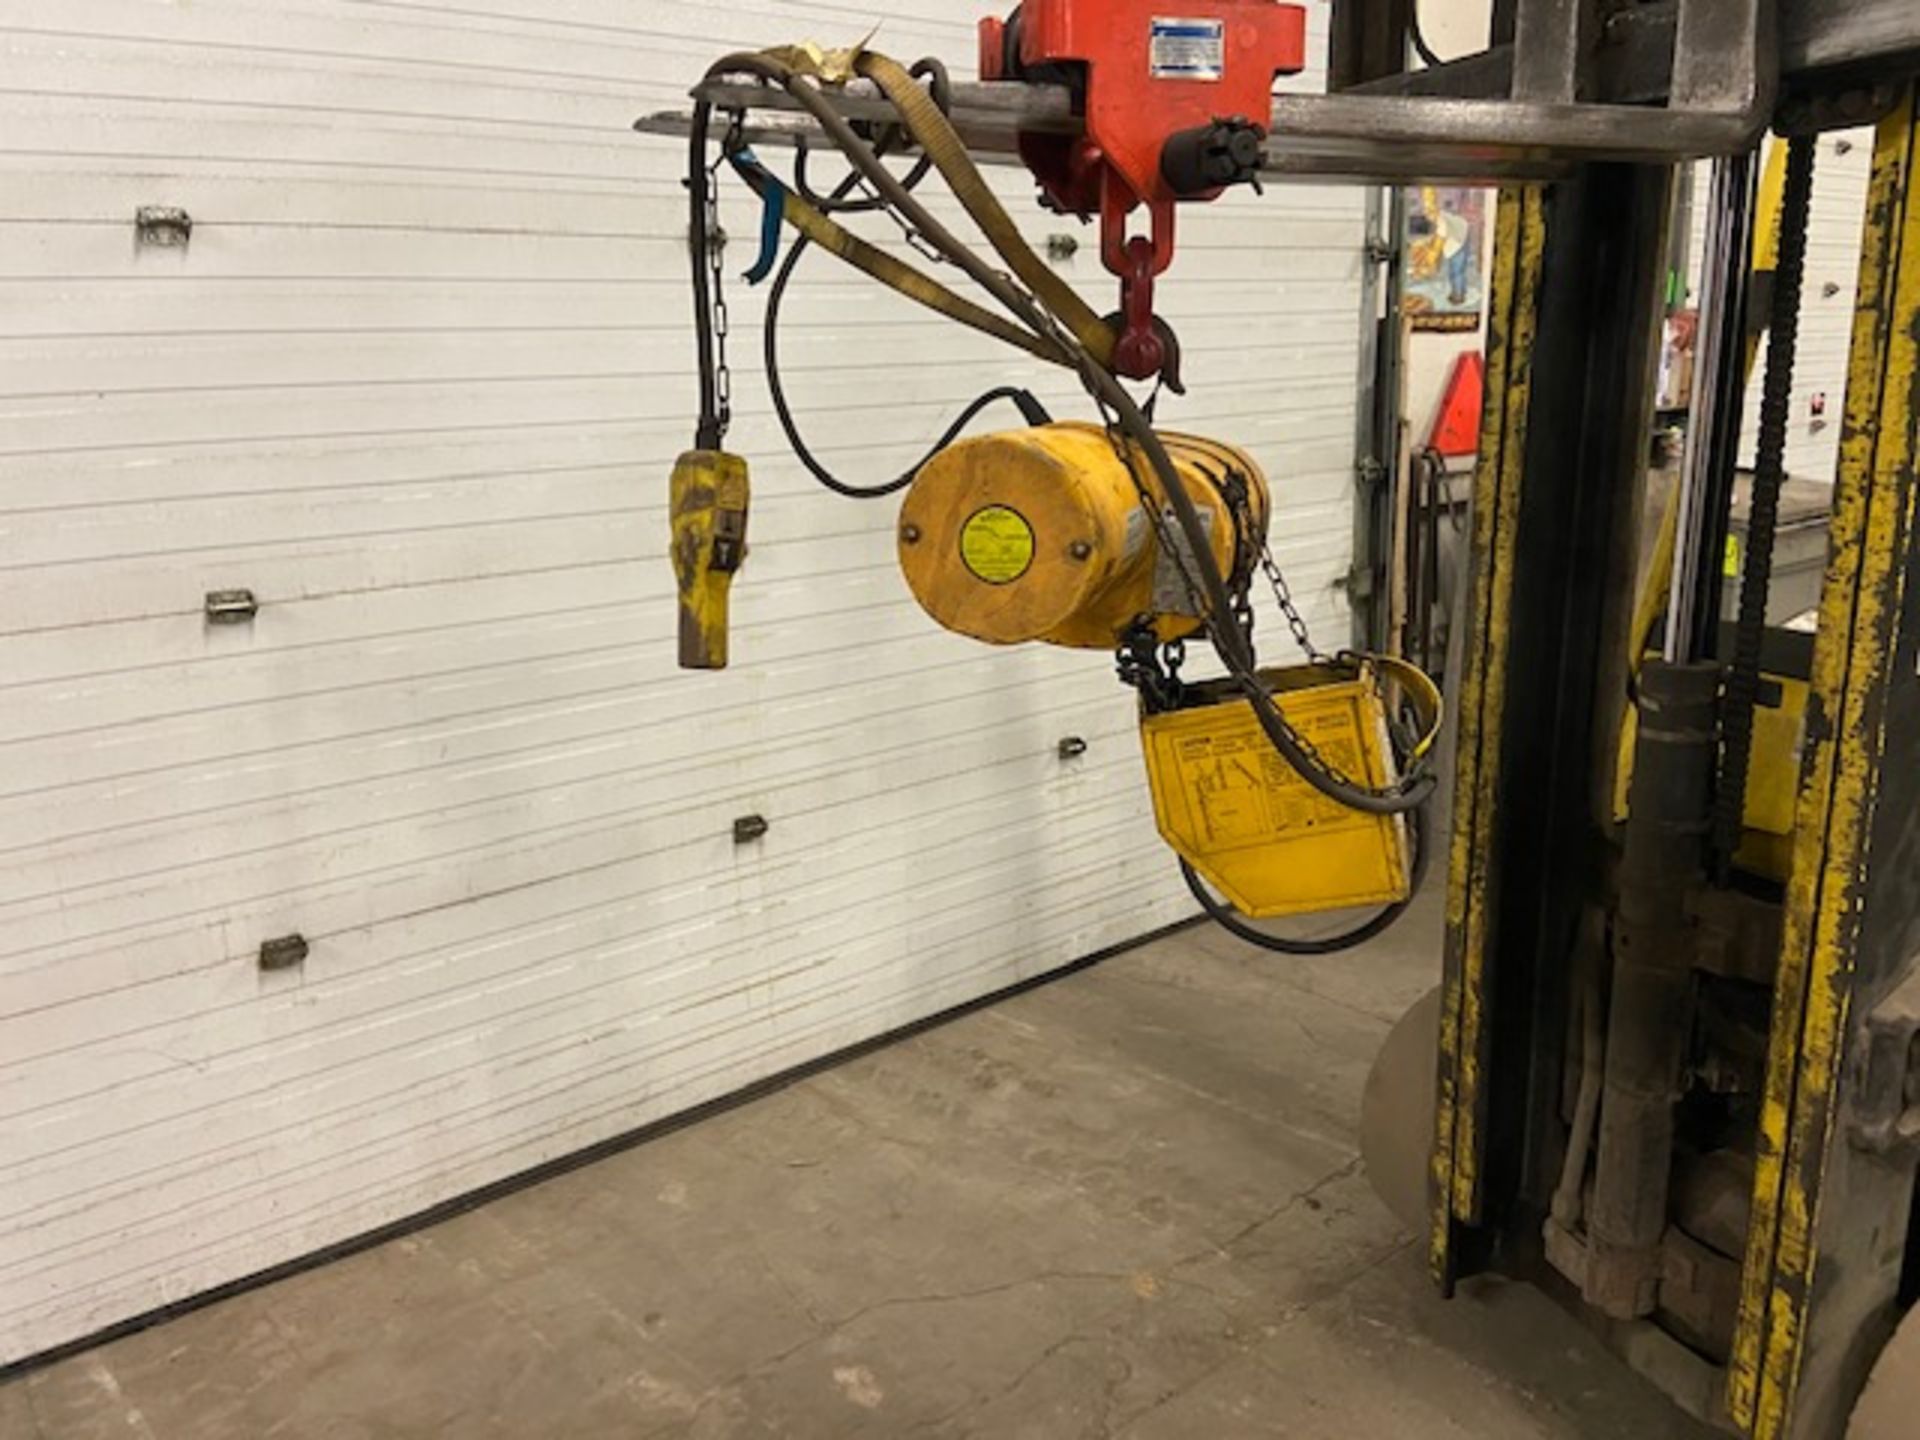 Budget 1/4 Ton Capacity Electric Hoist with pendant and trolley